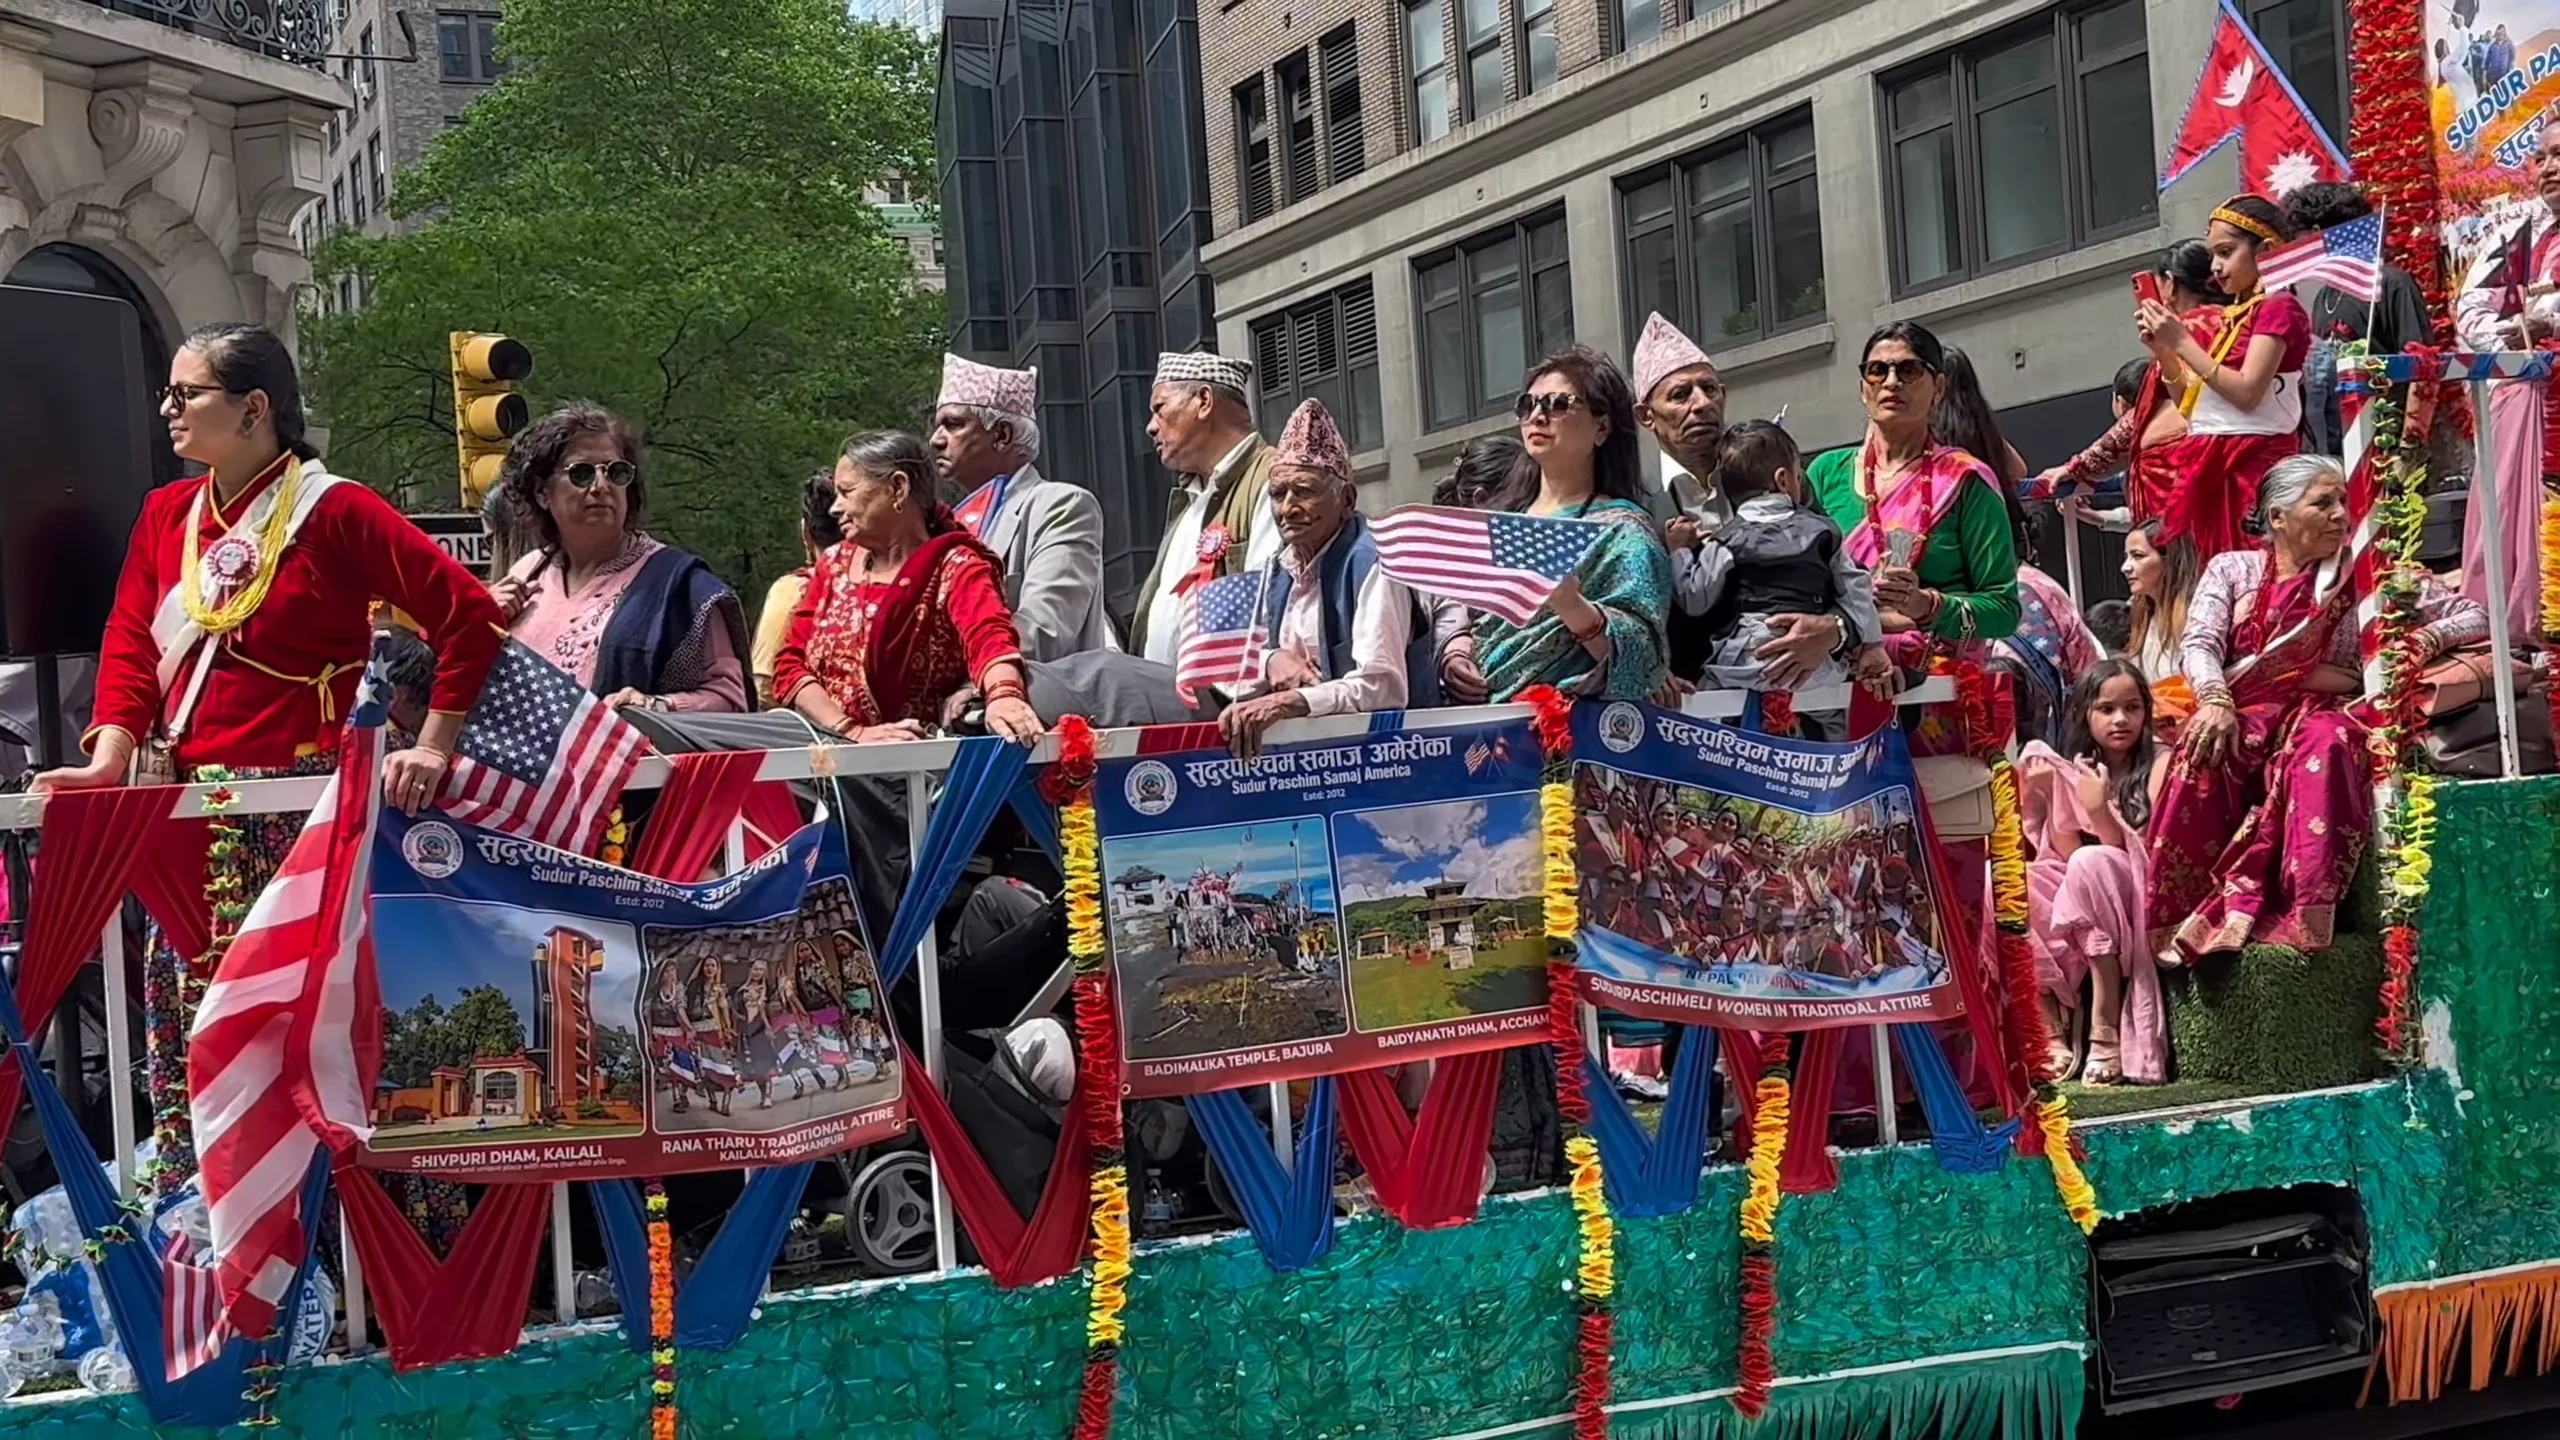 Nepal Day Parade observed in New York